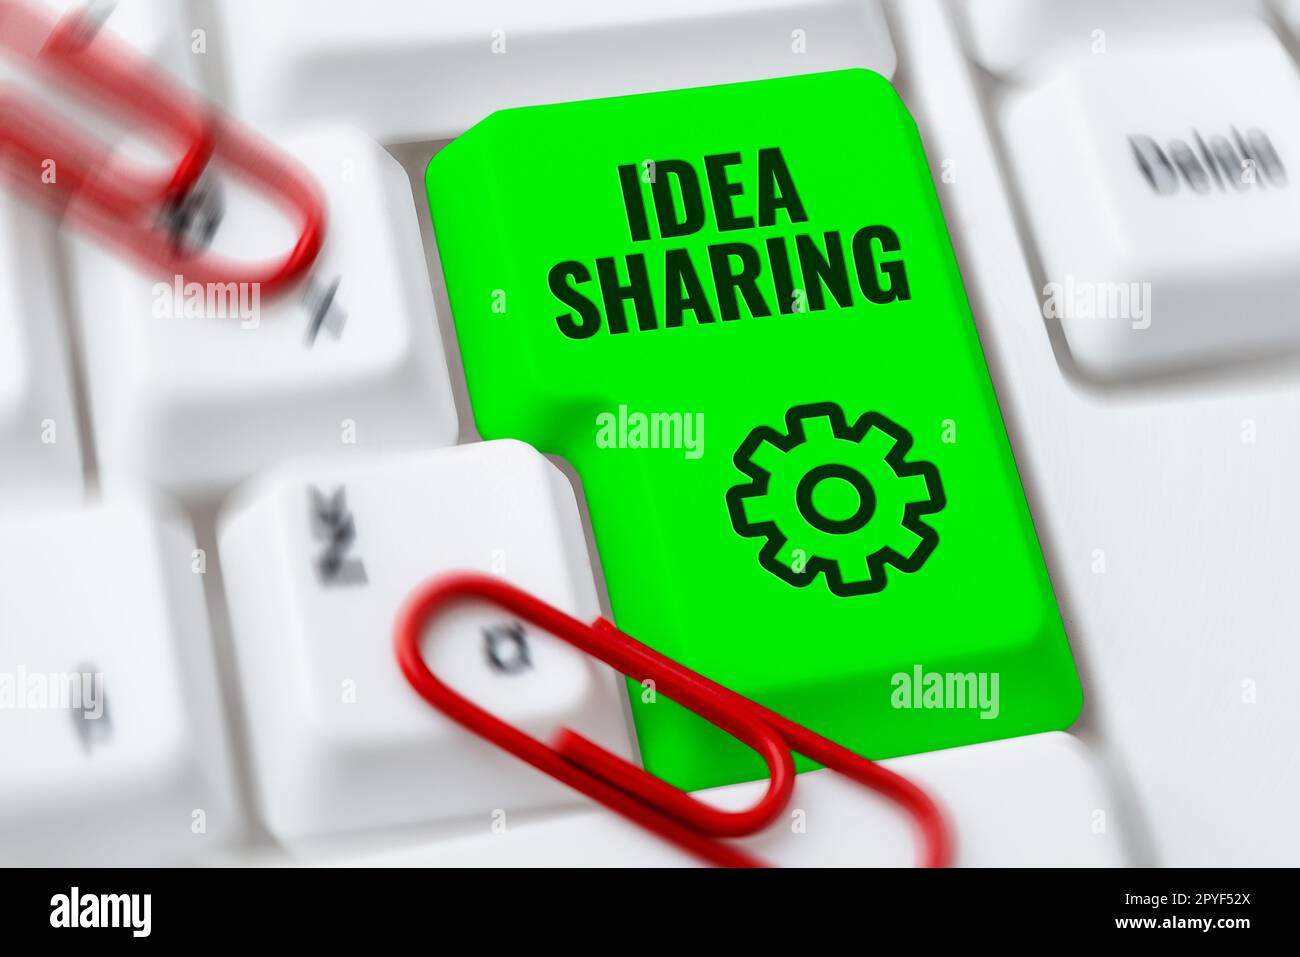 Writing displaying text Idea Sharing. Business showcase Startup launch innovation product, creative thinking Stock Photo